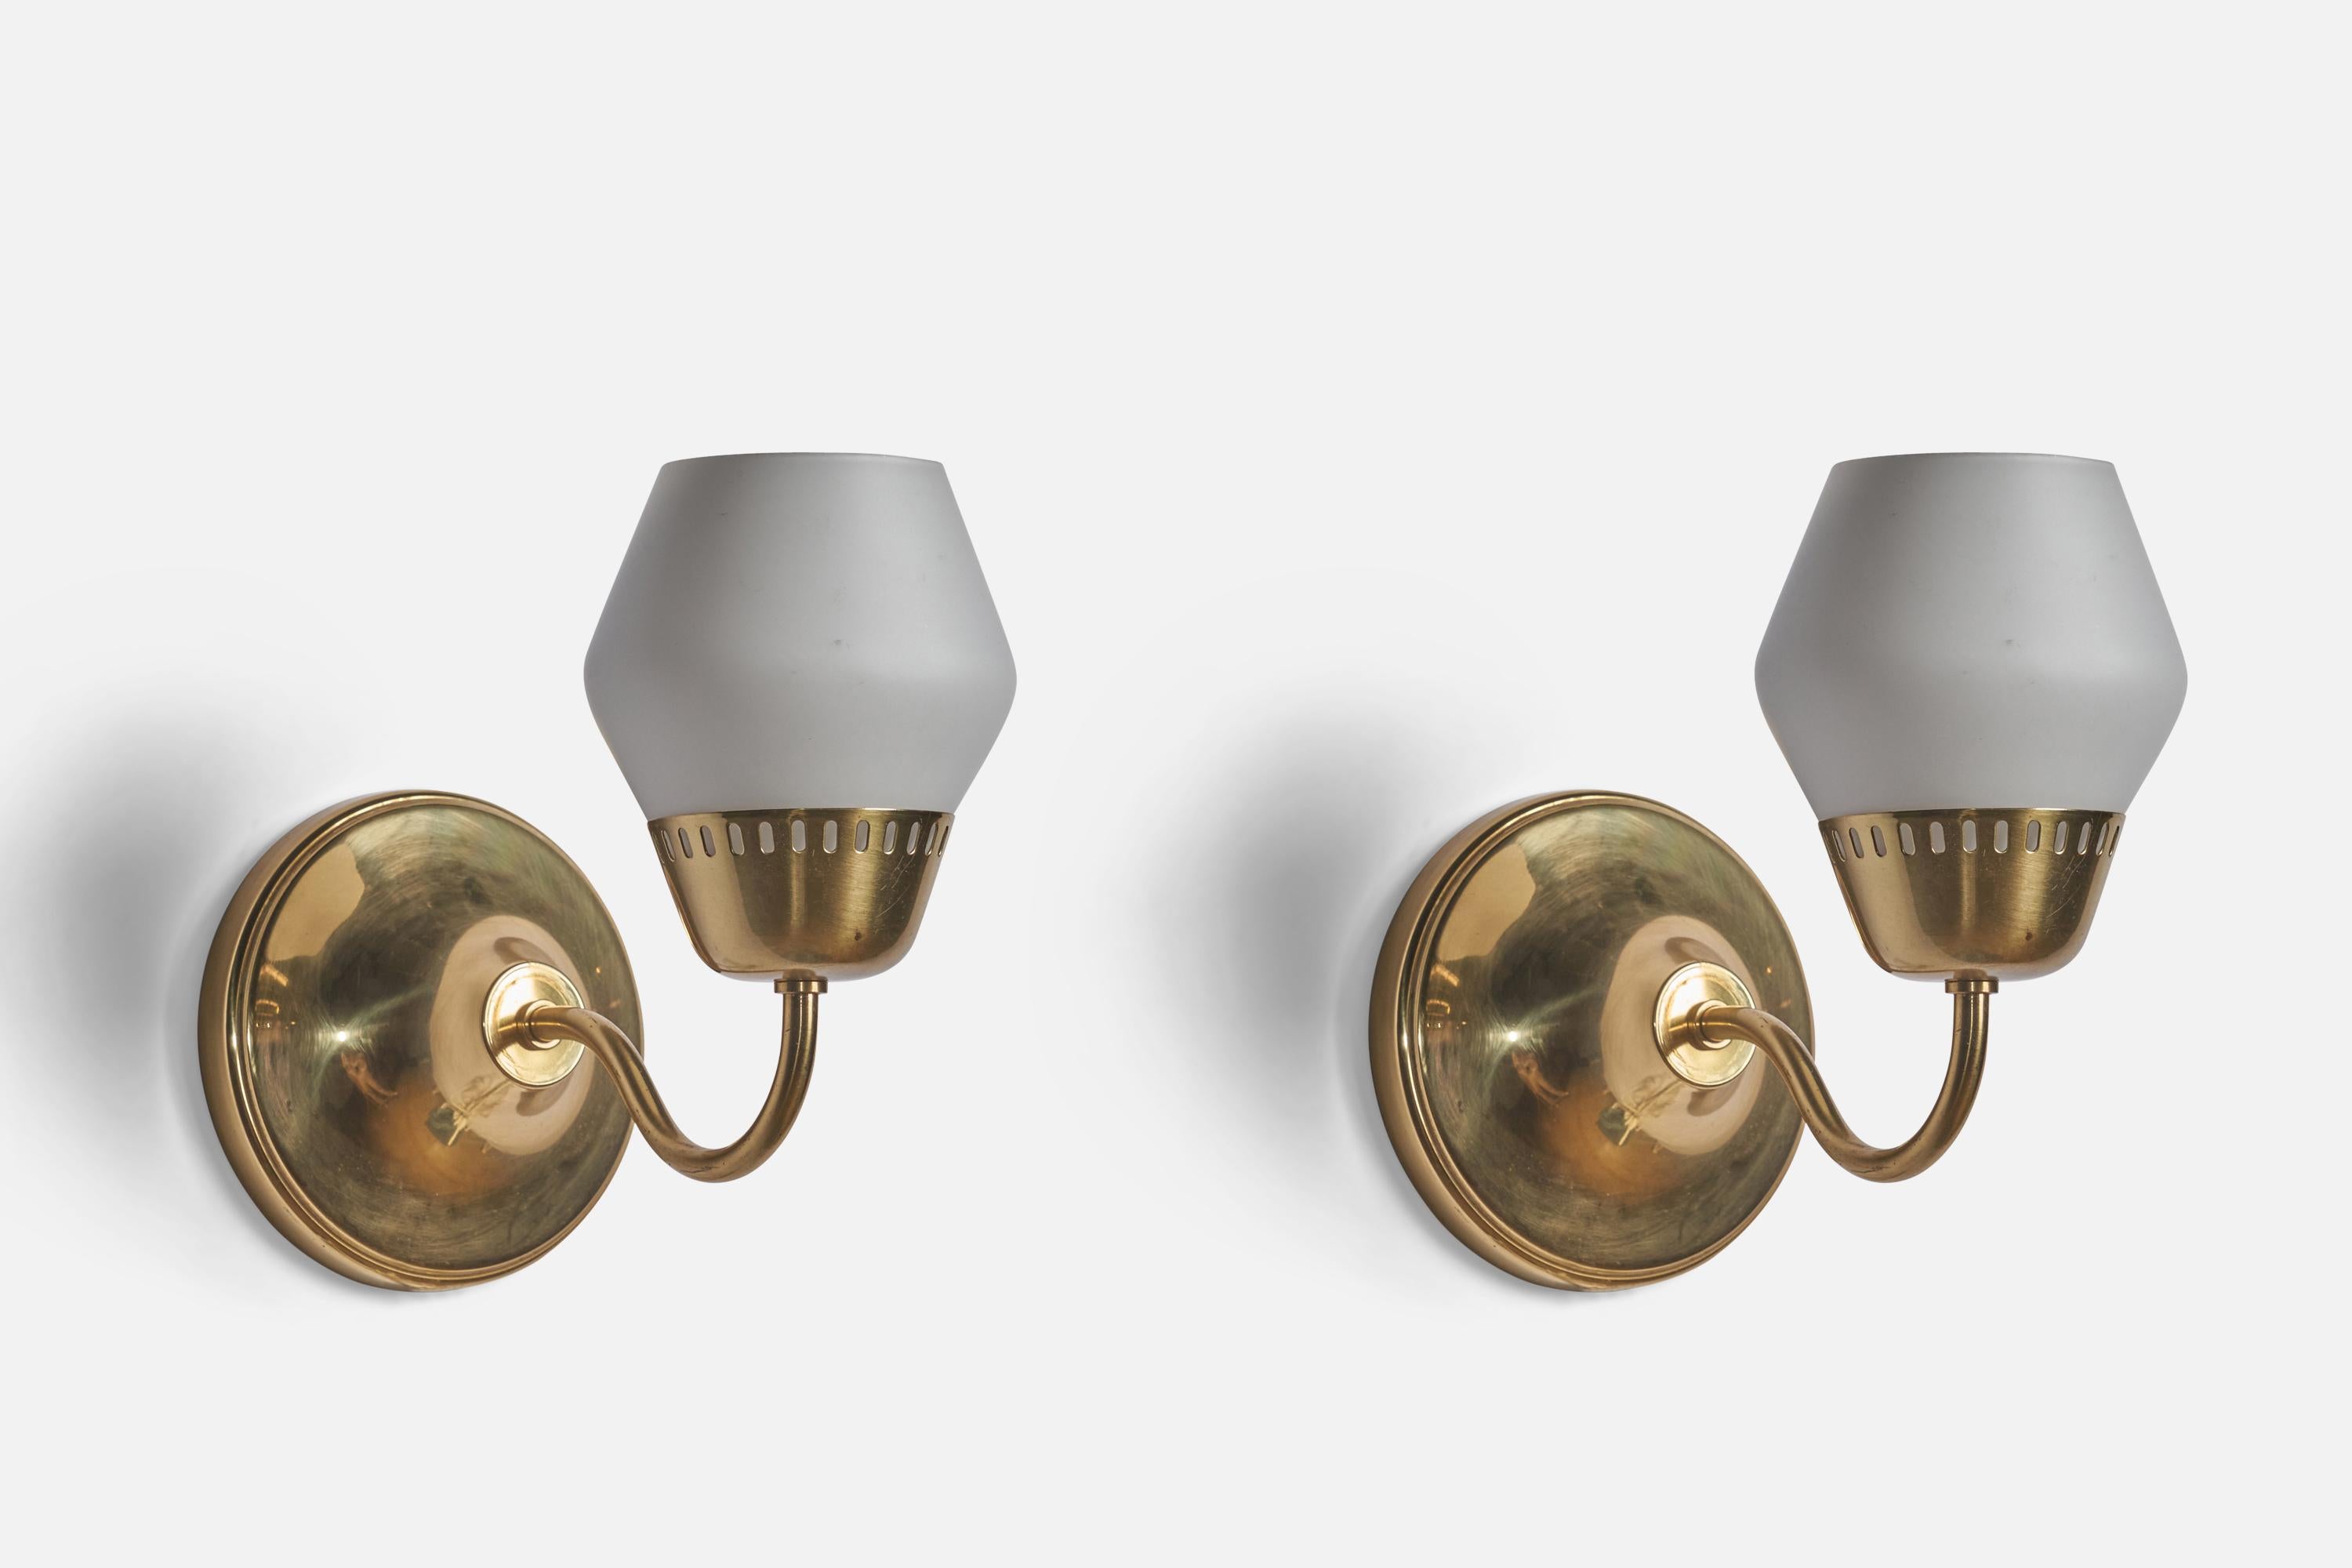 A pair of glass and brass wall lights designed and produced in Sweden, c. 1960s

Overall Dimensions (inches): 9.5